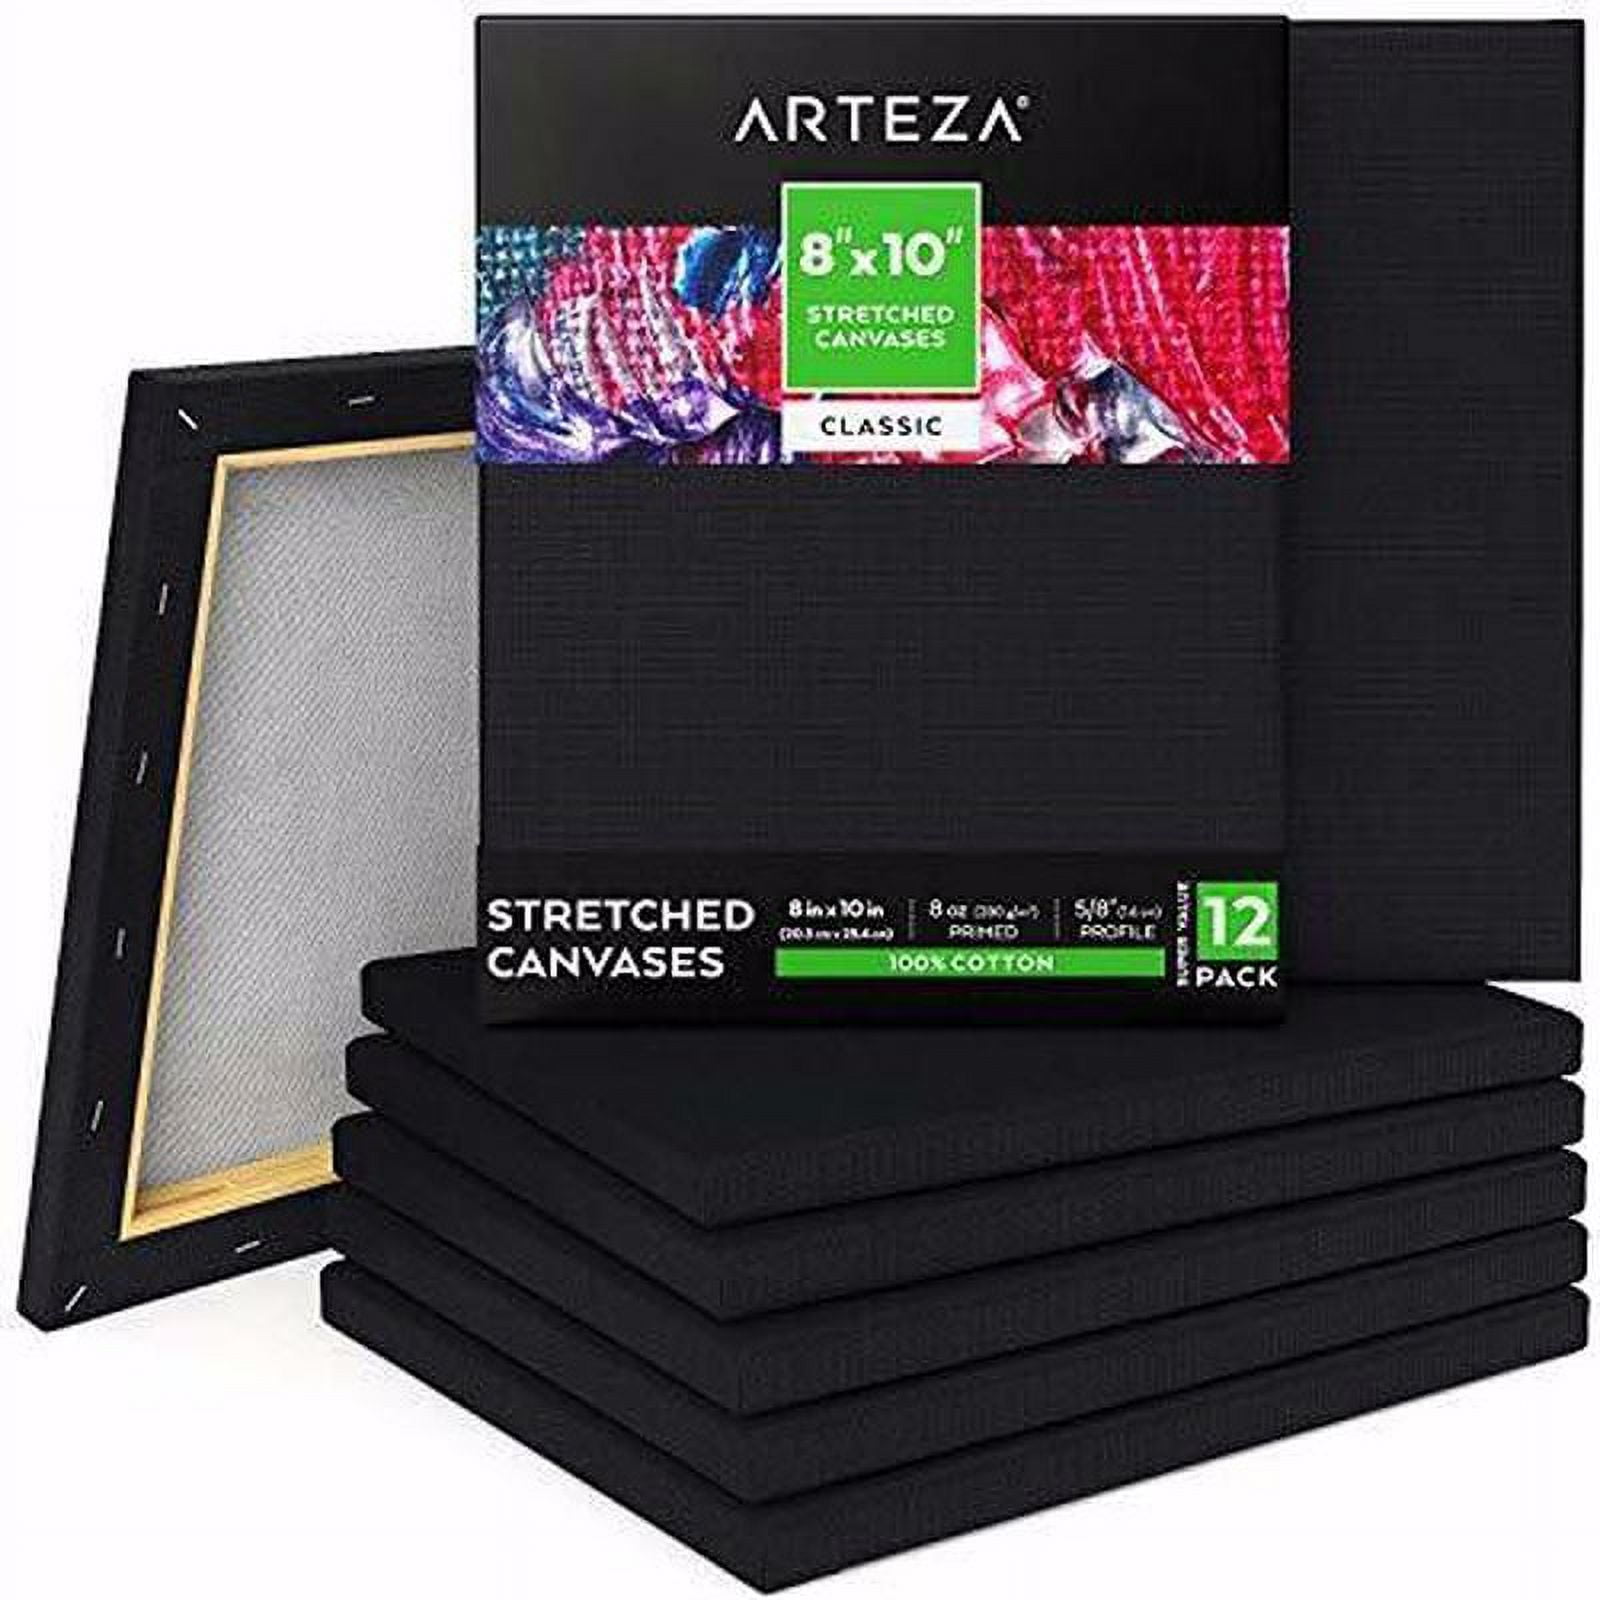 Arteza Stretched Canvas, Pack of 8, 10 x 10 Inches, Square Blank Canvases,  100% Cotton, 8 oz Gesso-Primed, Art Supplies for Acrylic Pouring and Oil  Painting